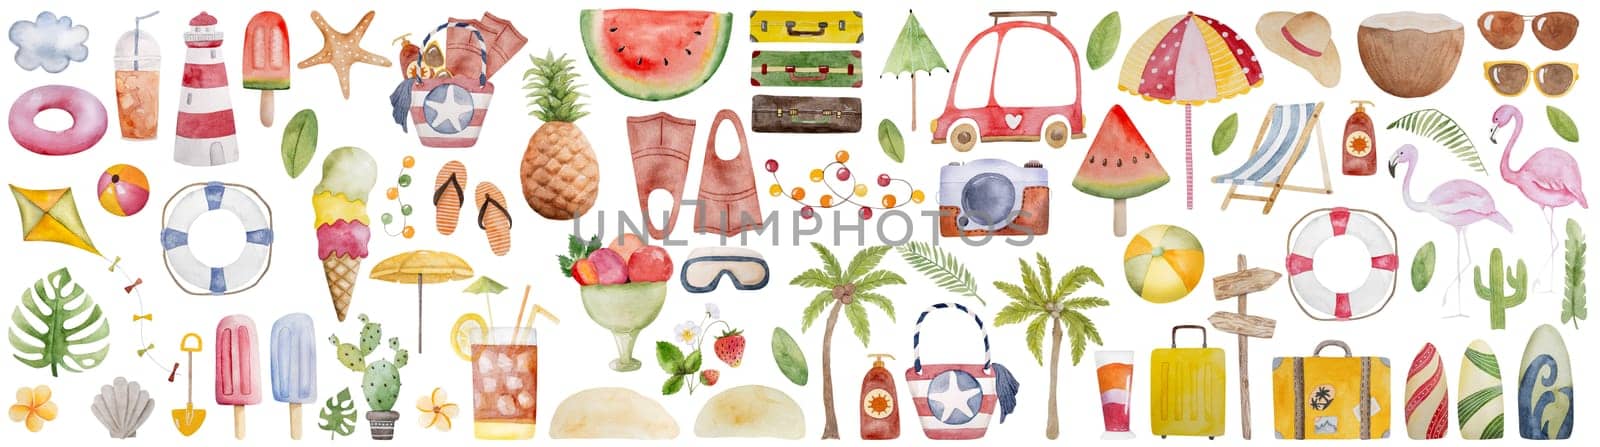 Hand-Painted Watercolor Set Of Images Includes Beach Bag, Flippers, Camera, Cocktail, Etc by tan4ikk1